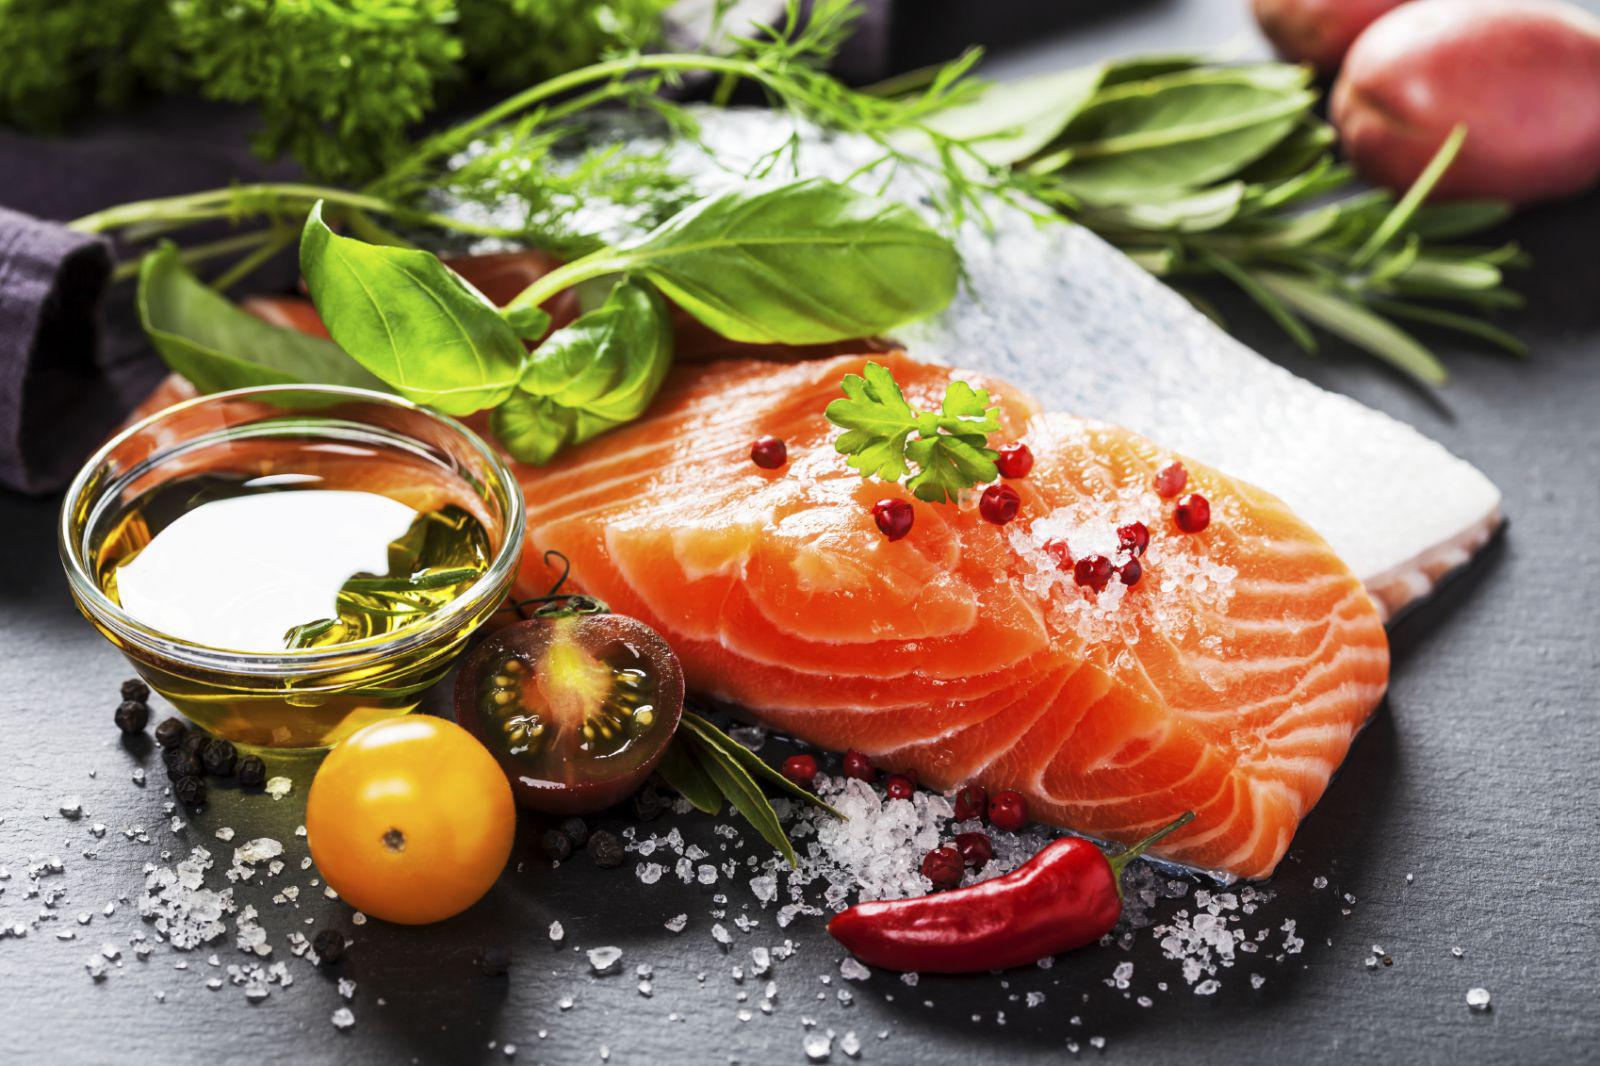 Fish is high in Omega 3 Fat